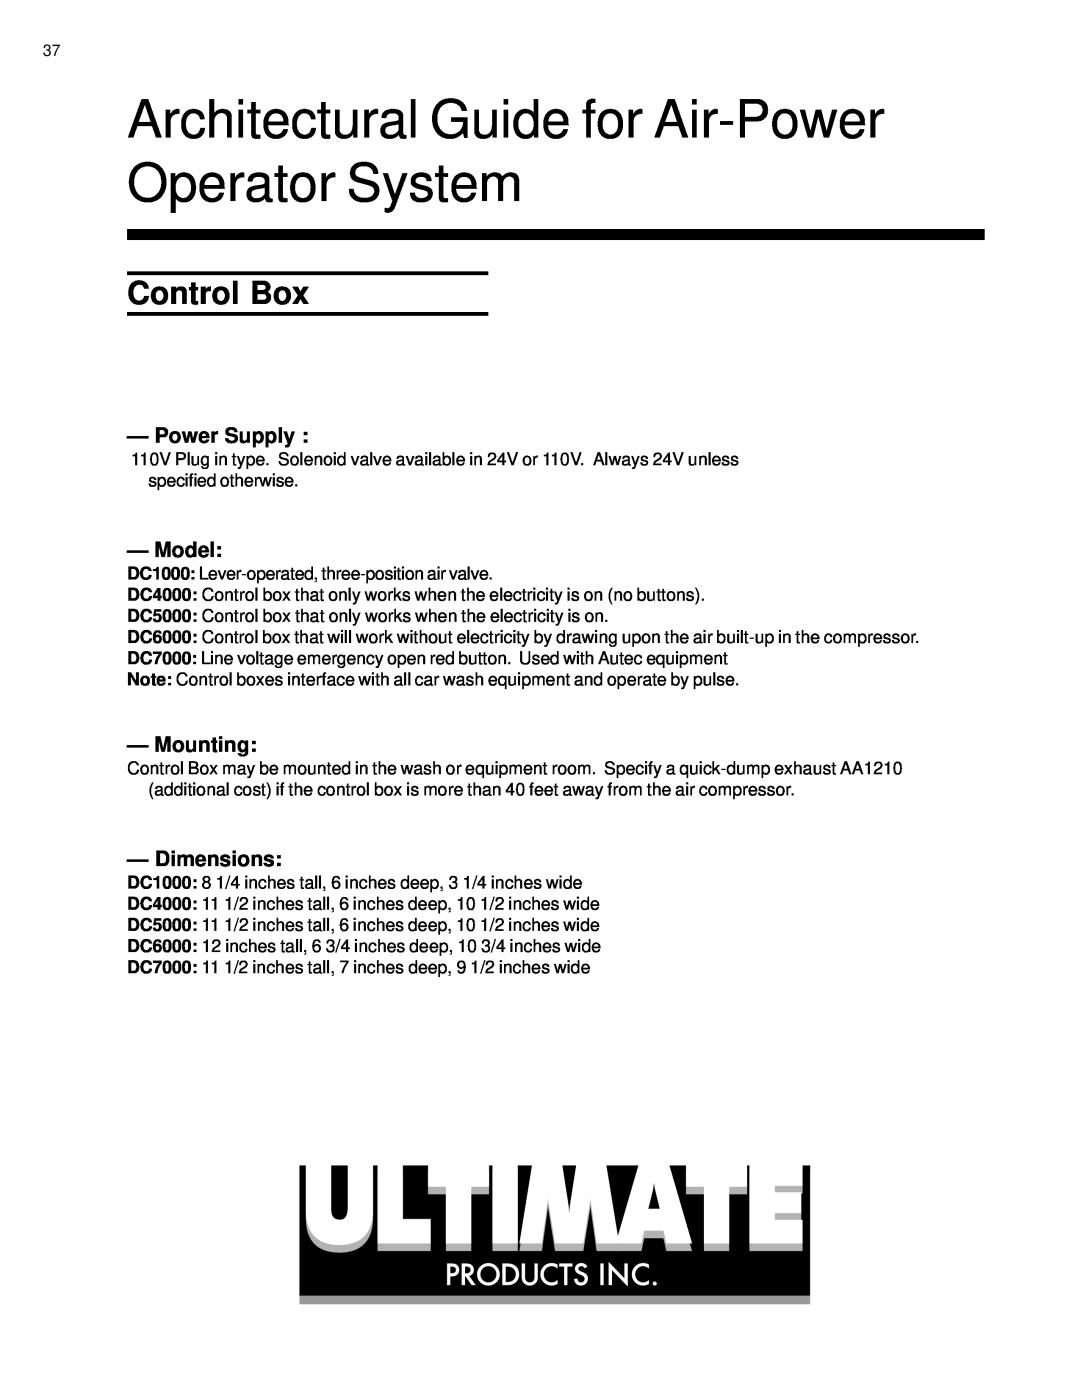 Ultimate Products UP-206 Architectural Guide for Air-PowerOperator System, Control Box, Power Supply, Model, Mounting 